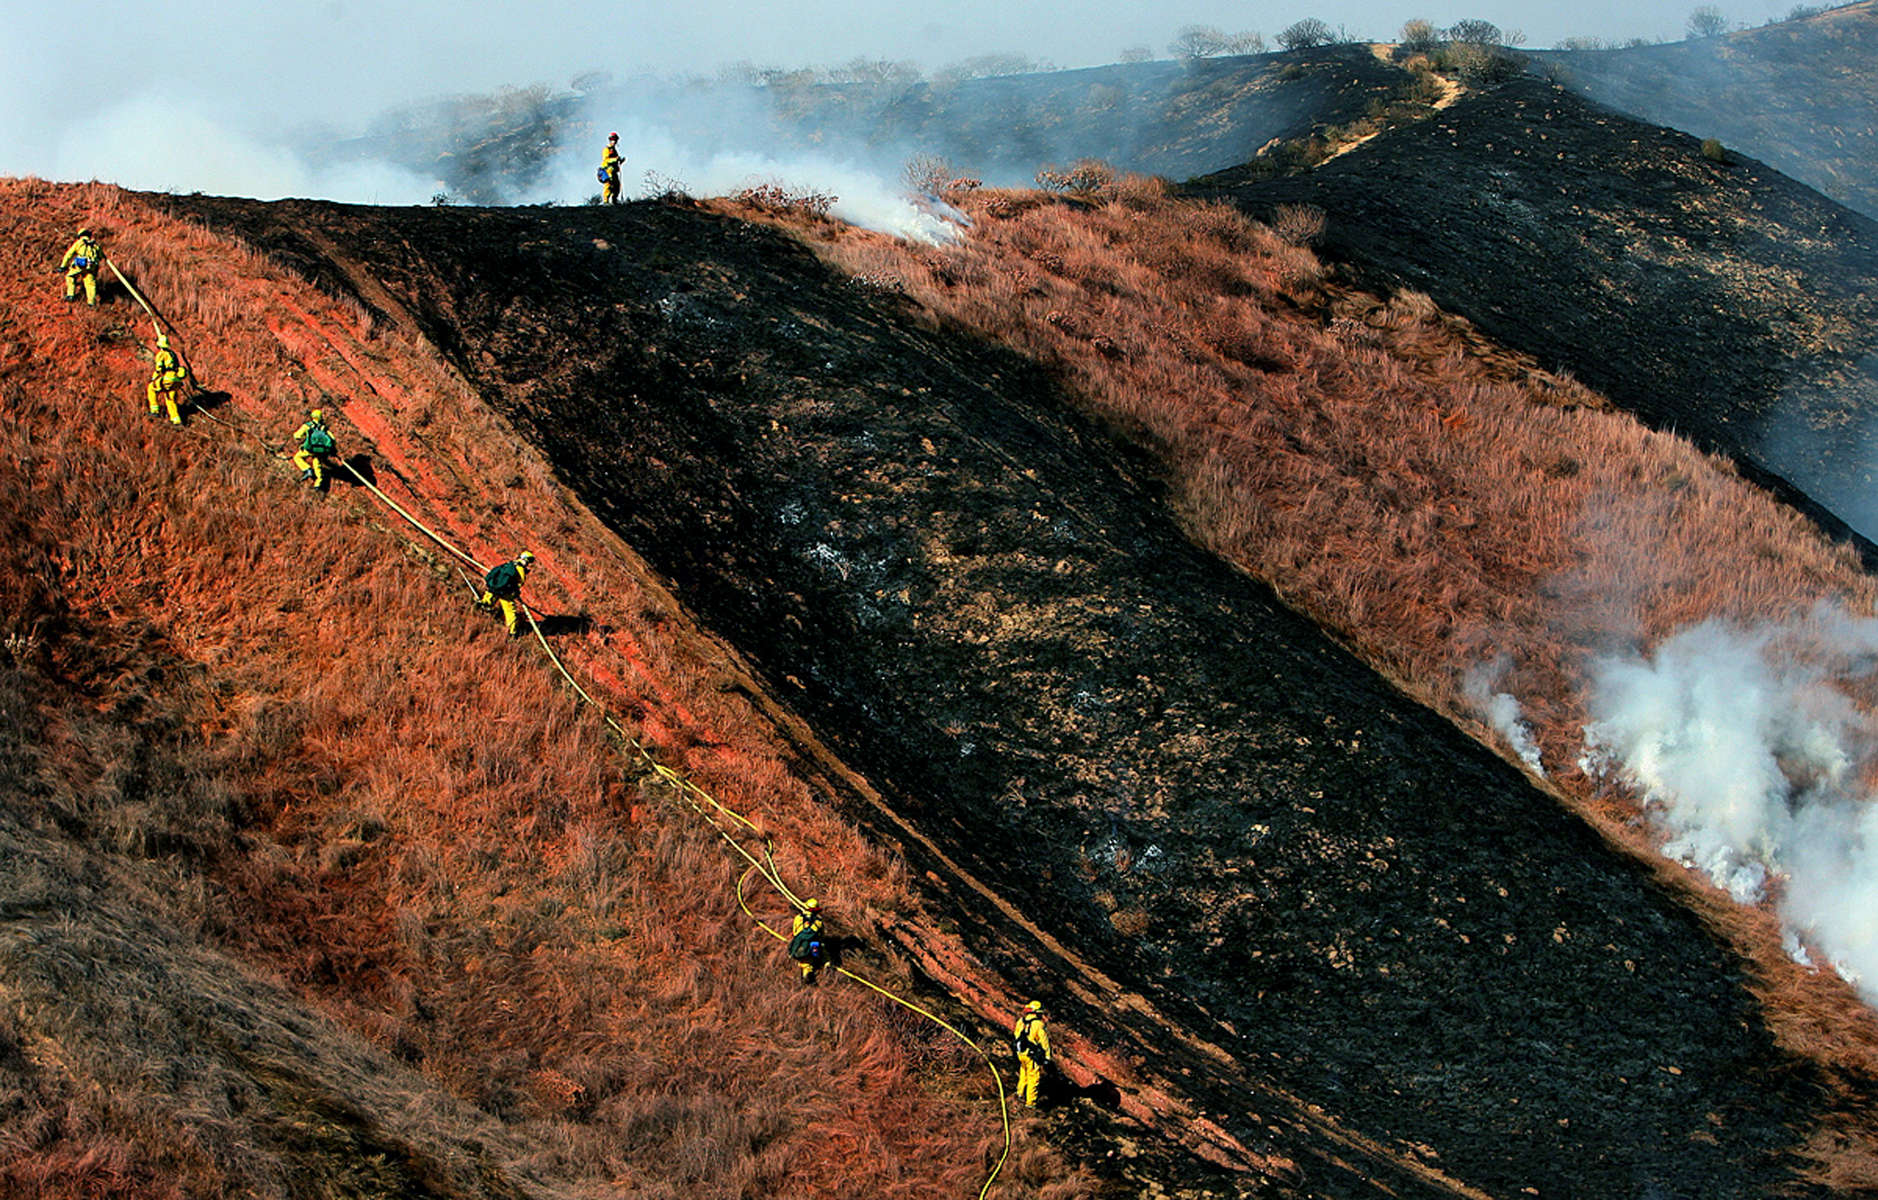 Firefighters carry a hose line to extinguish spot fires after fire retardant was dropped in a canyonnear homes on Parvin Lane in Colton, Calif. No homes were damaged in the 20-acre brush fire. (The Press-Enterprise/ Mark Zaleski)